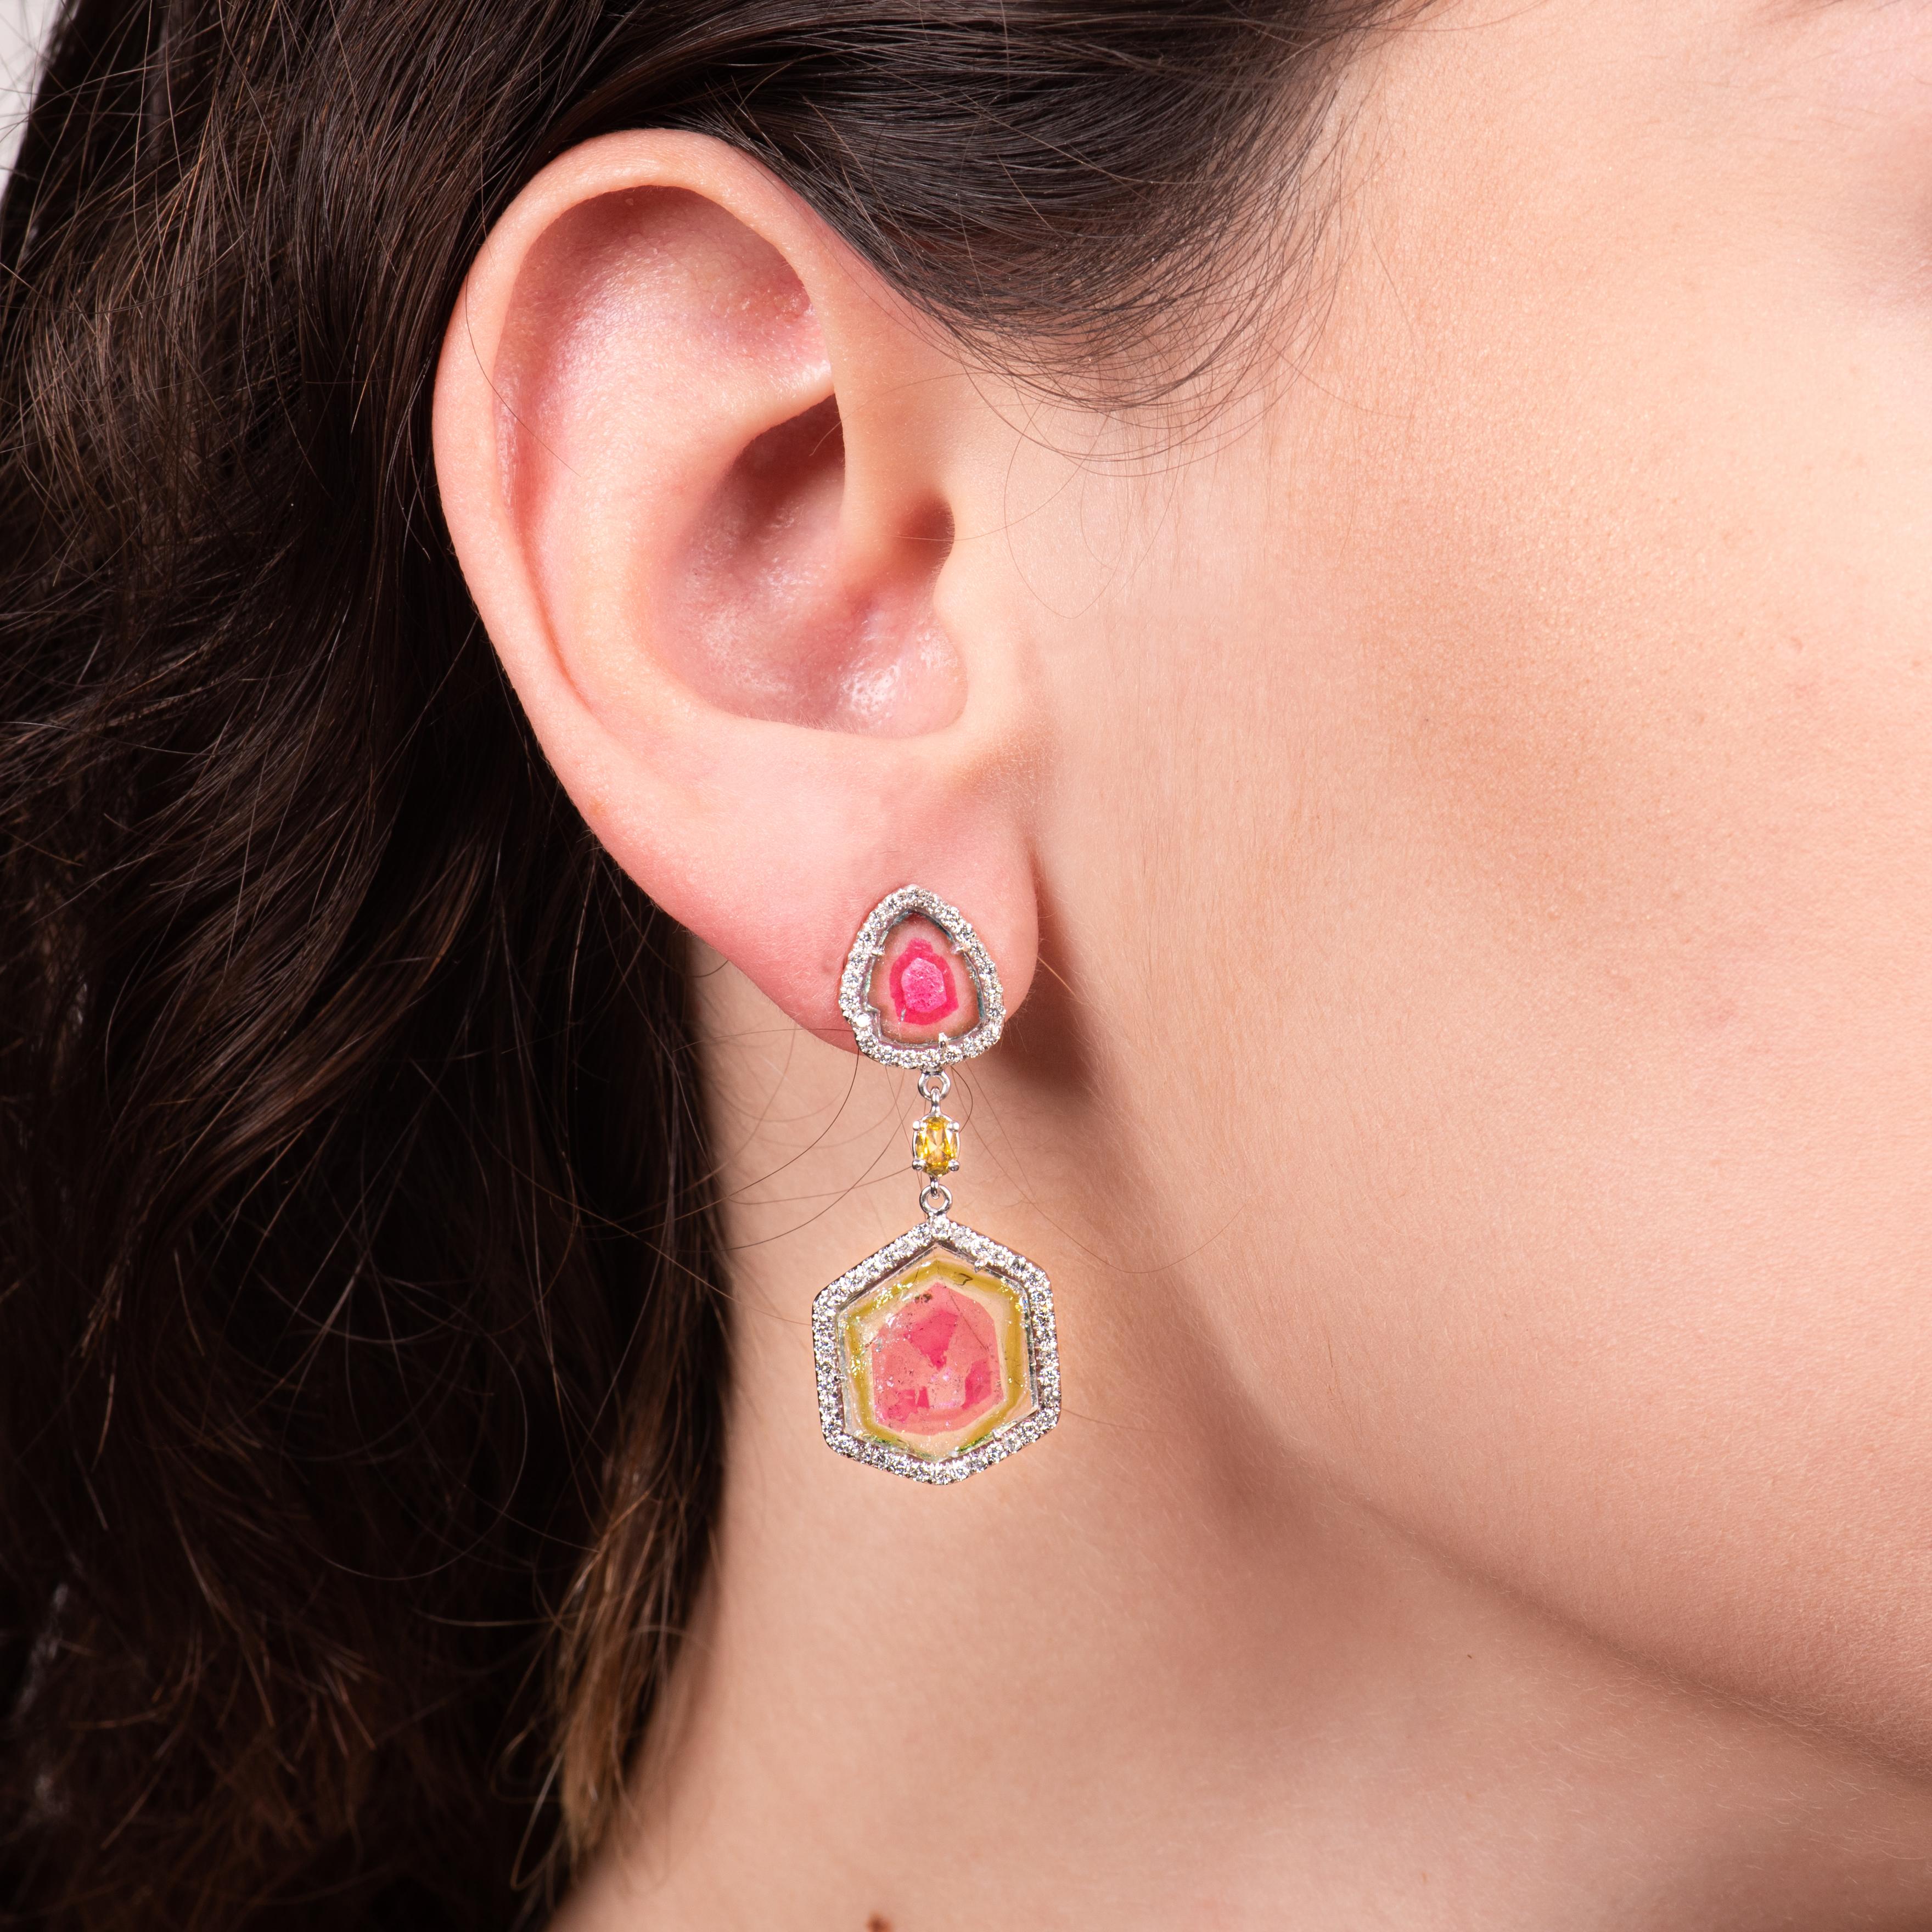 These earrings feature a 6.35ctw pair of natural watermelon tourmaline slices, ranging from ~12.1 to 13.71mm, and 2.42ct total weight pair of natural tri-color watermelon tourmaline, ranging from ~7.5 to 9.00mm in diameter, set in 14kt white gold